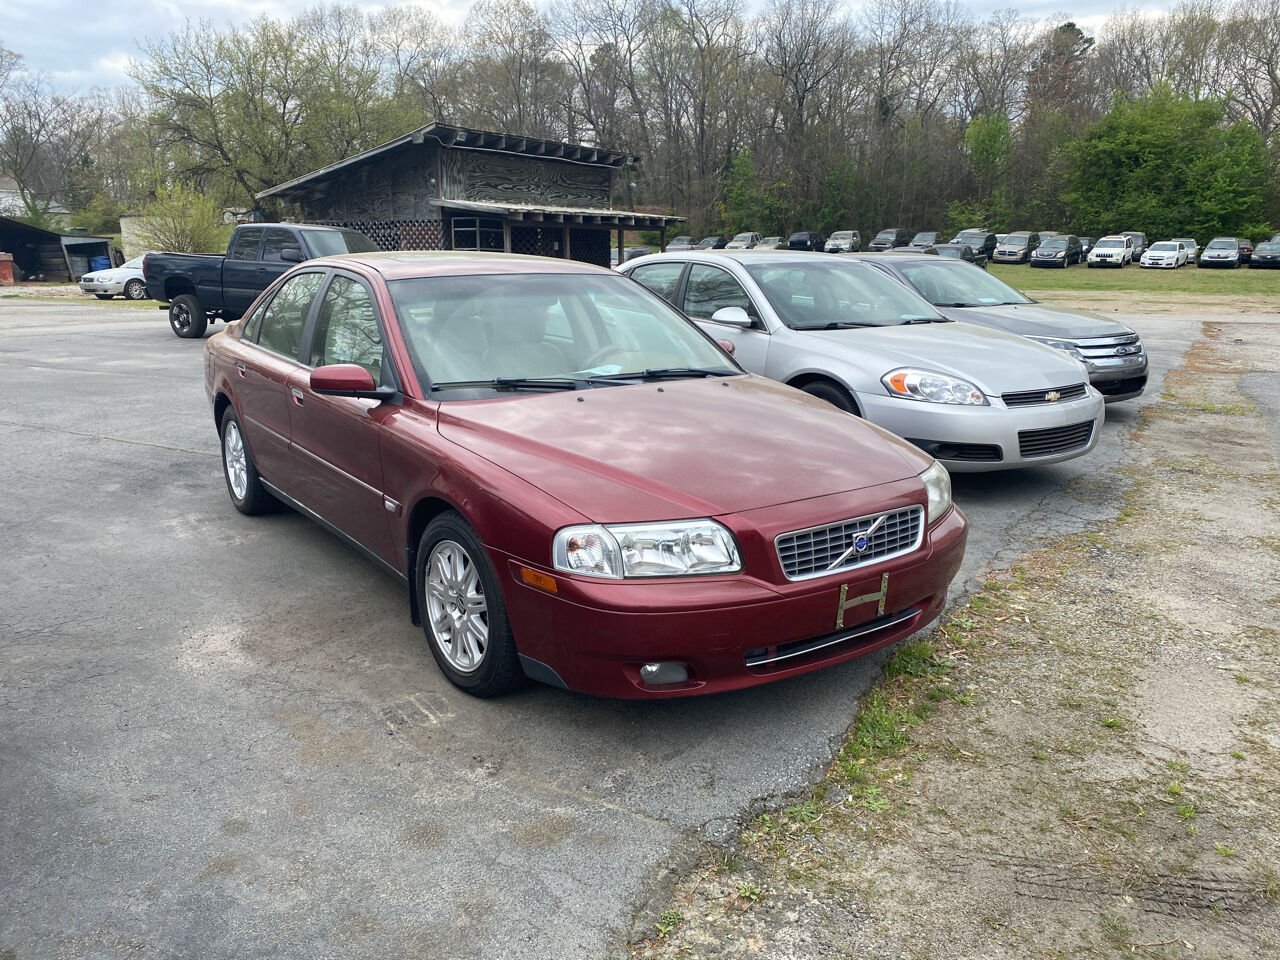 2005 Volvo S80 For Sale - Carsforsale.com®